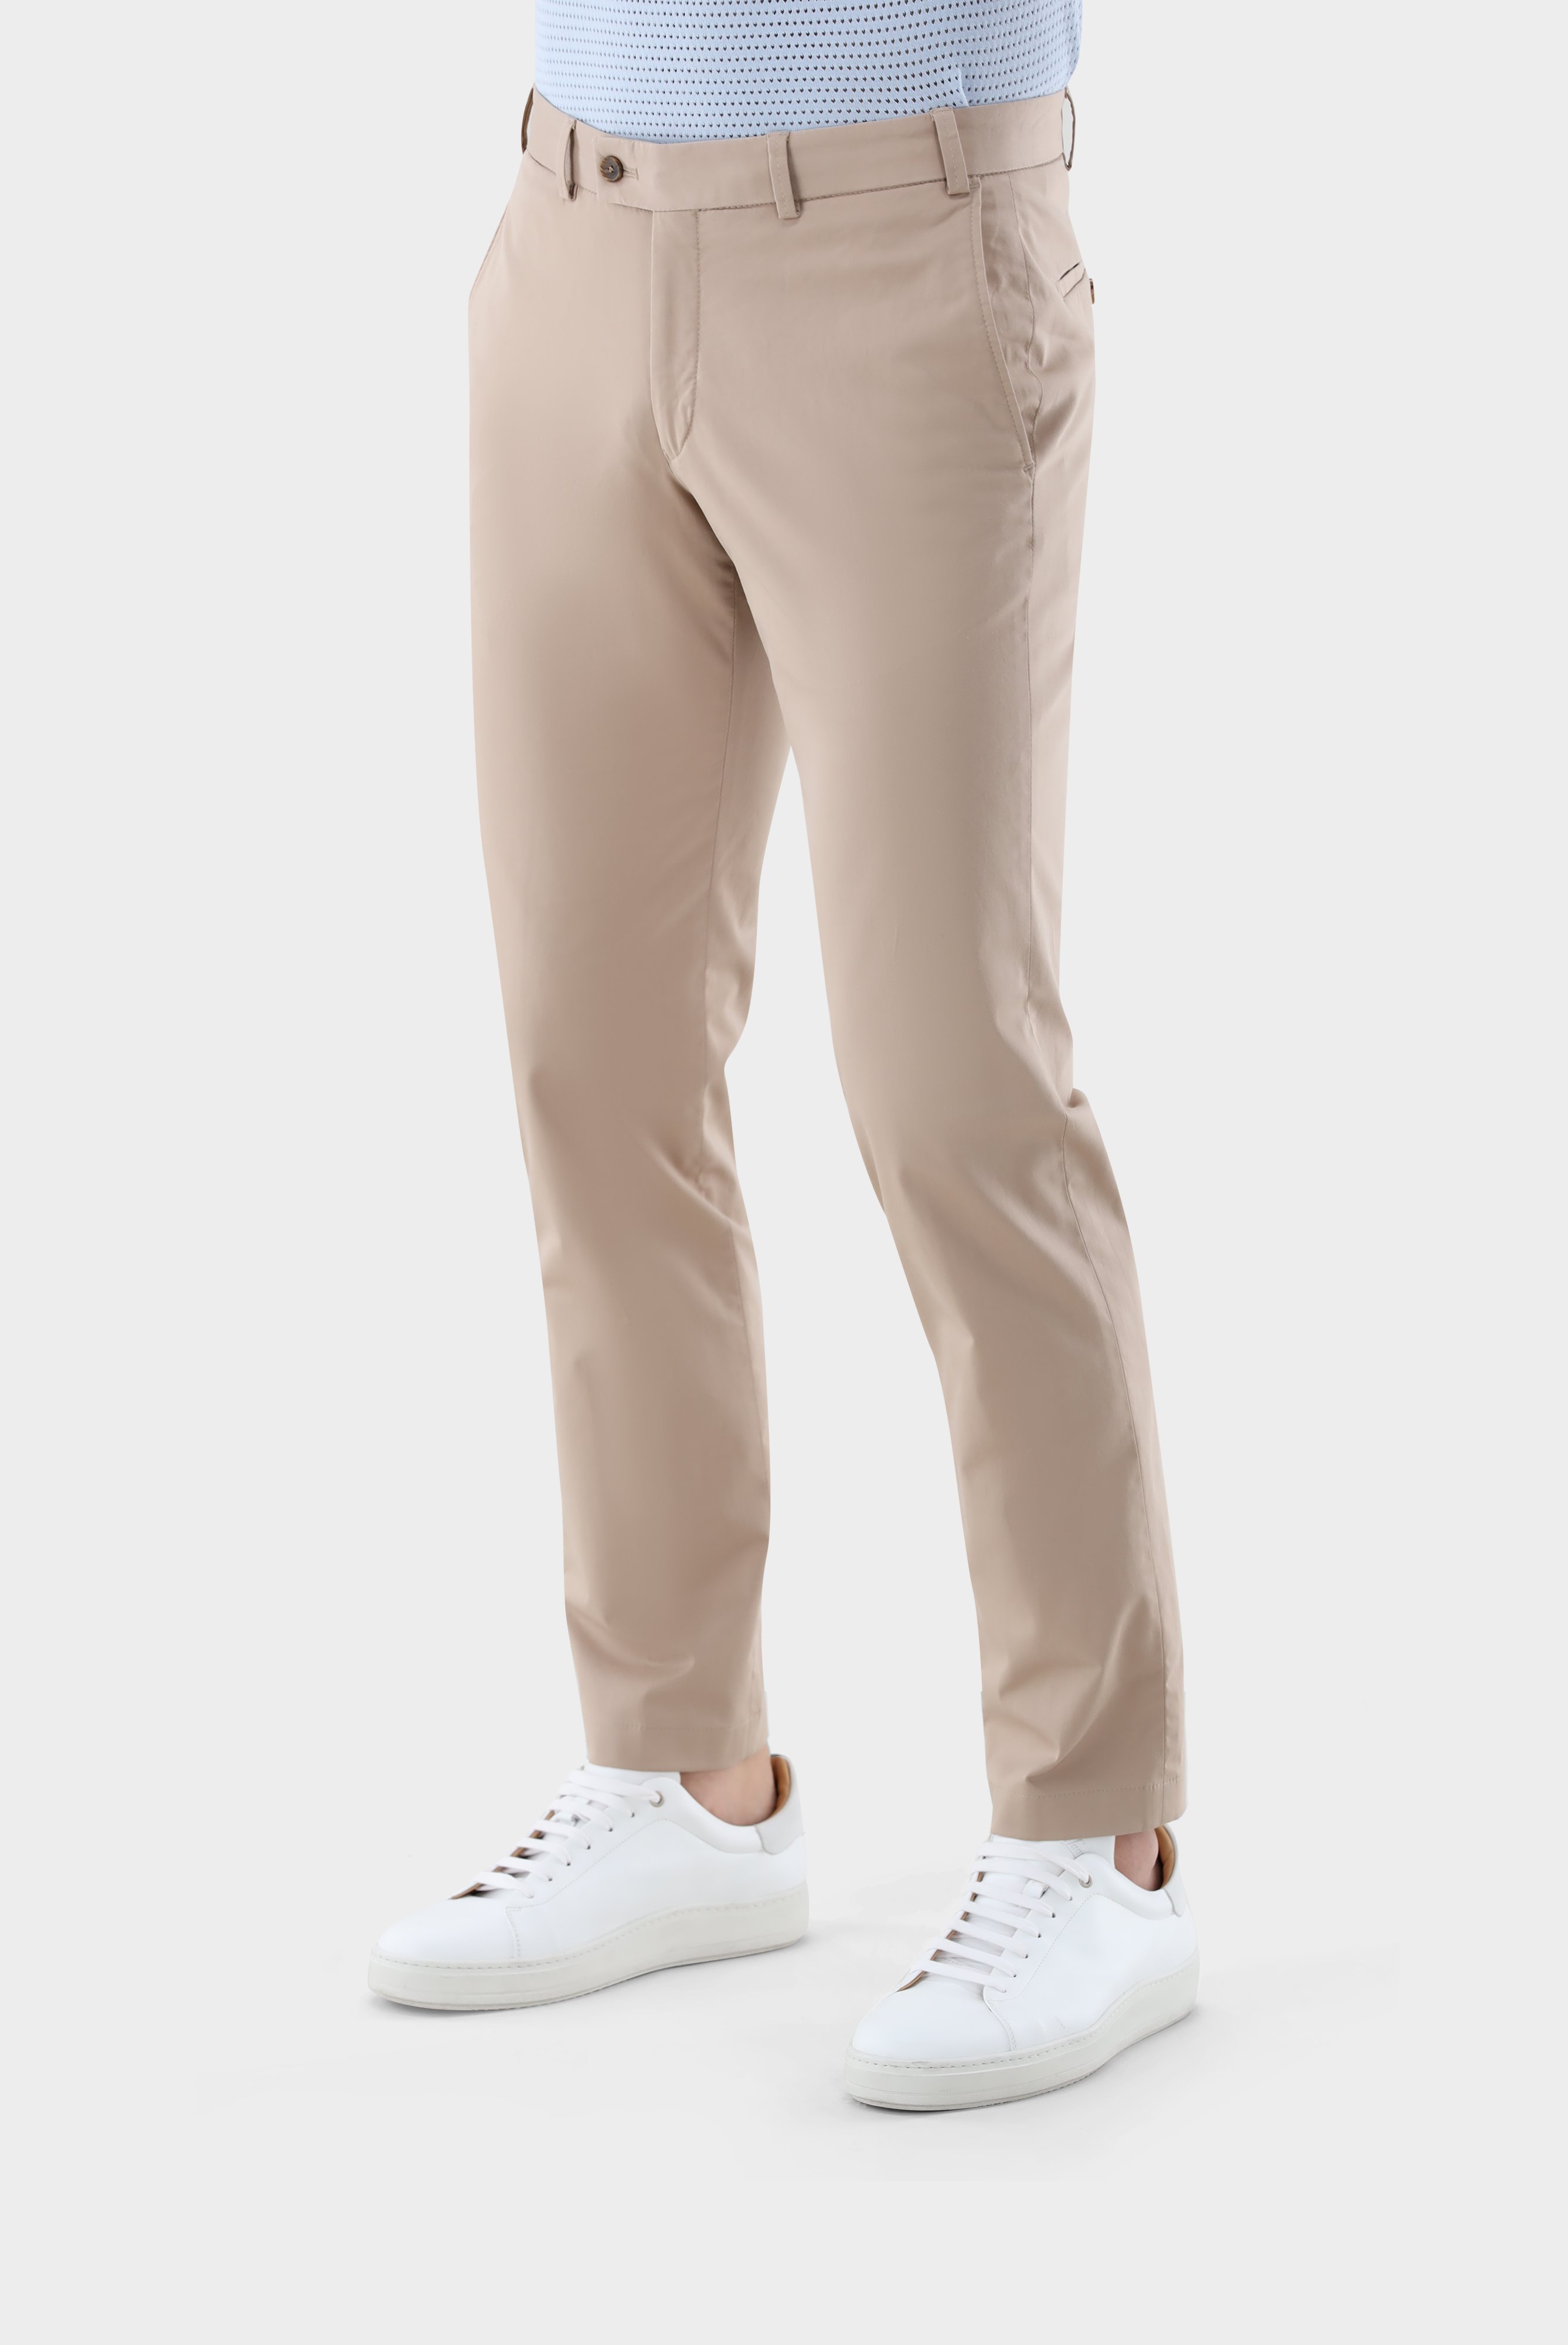 Jeans & Trousers+Cotton with Stretch Tapered Chinos+80.7858..J00151.140.48